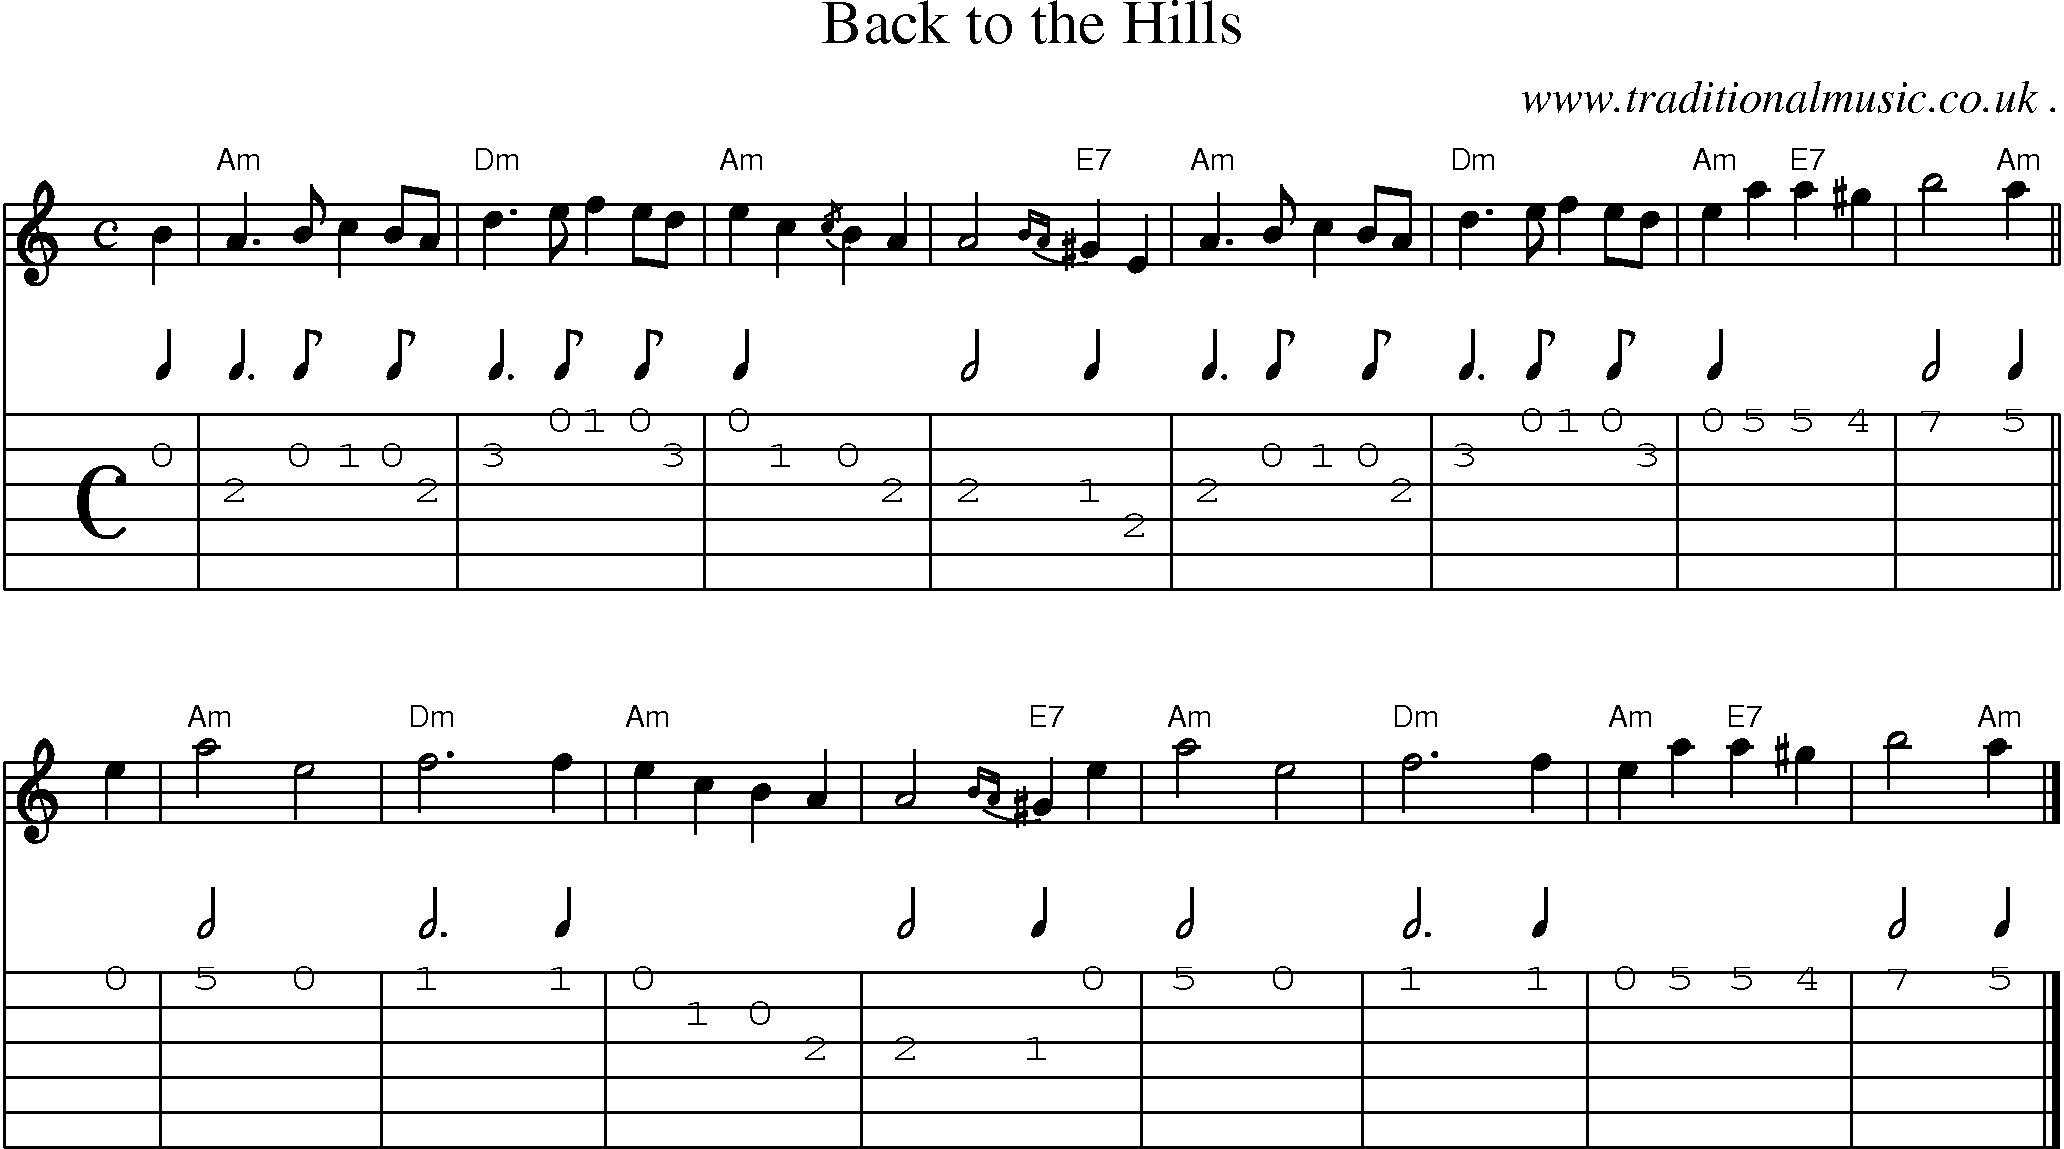 Sheet-music  score, Chords and Guitar Tabs for Back To The Hills